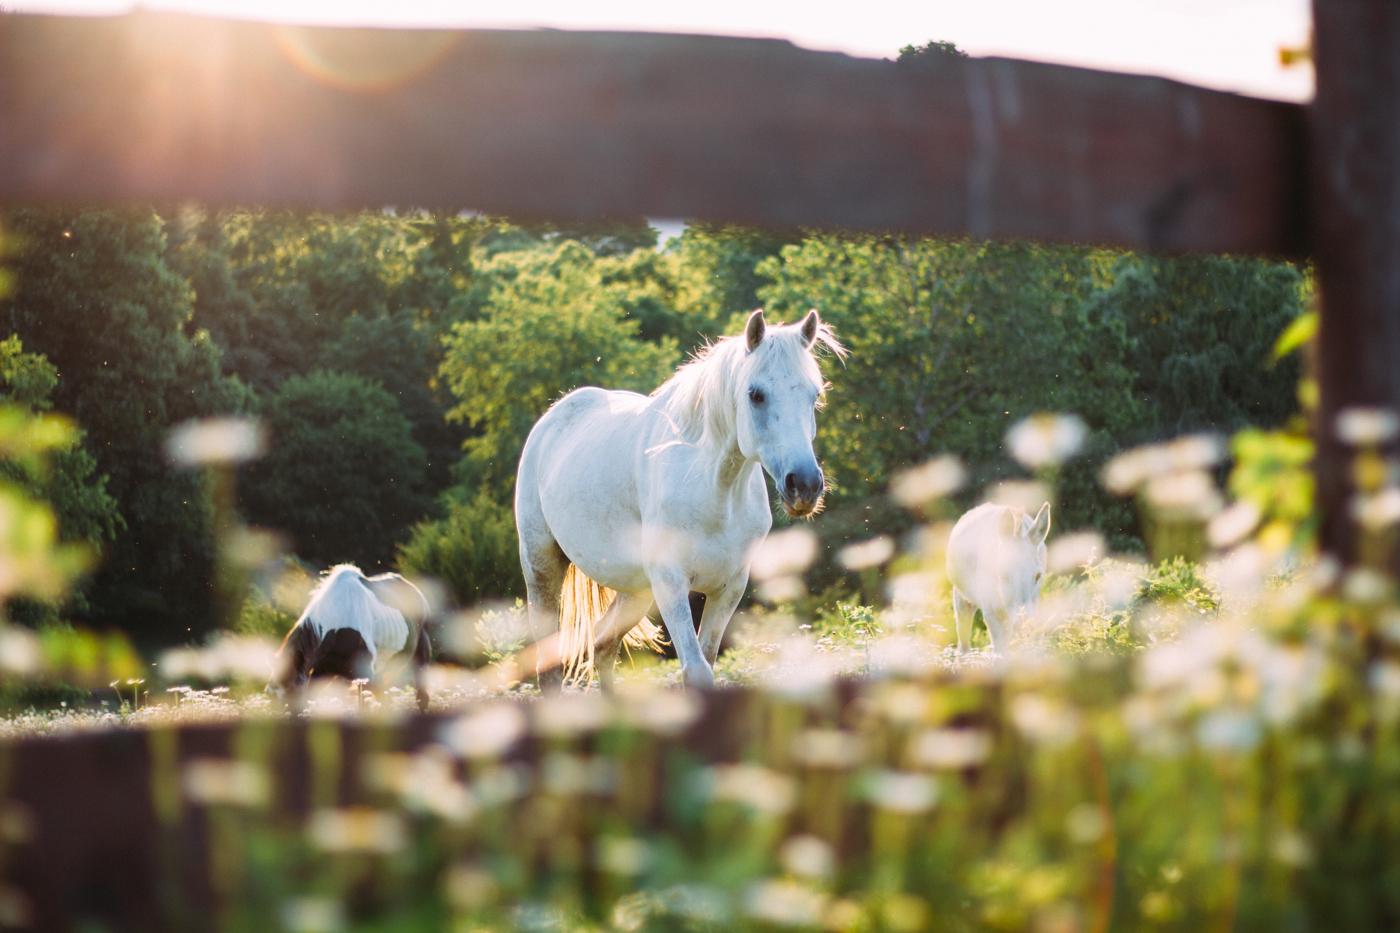 A white horse grazing in a field behind a wooden fence on a sunny day